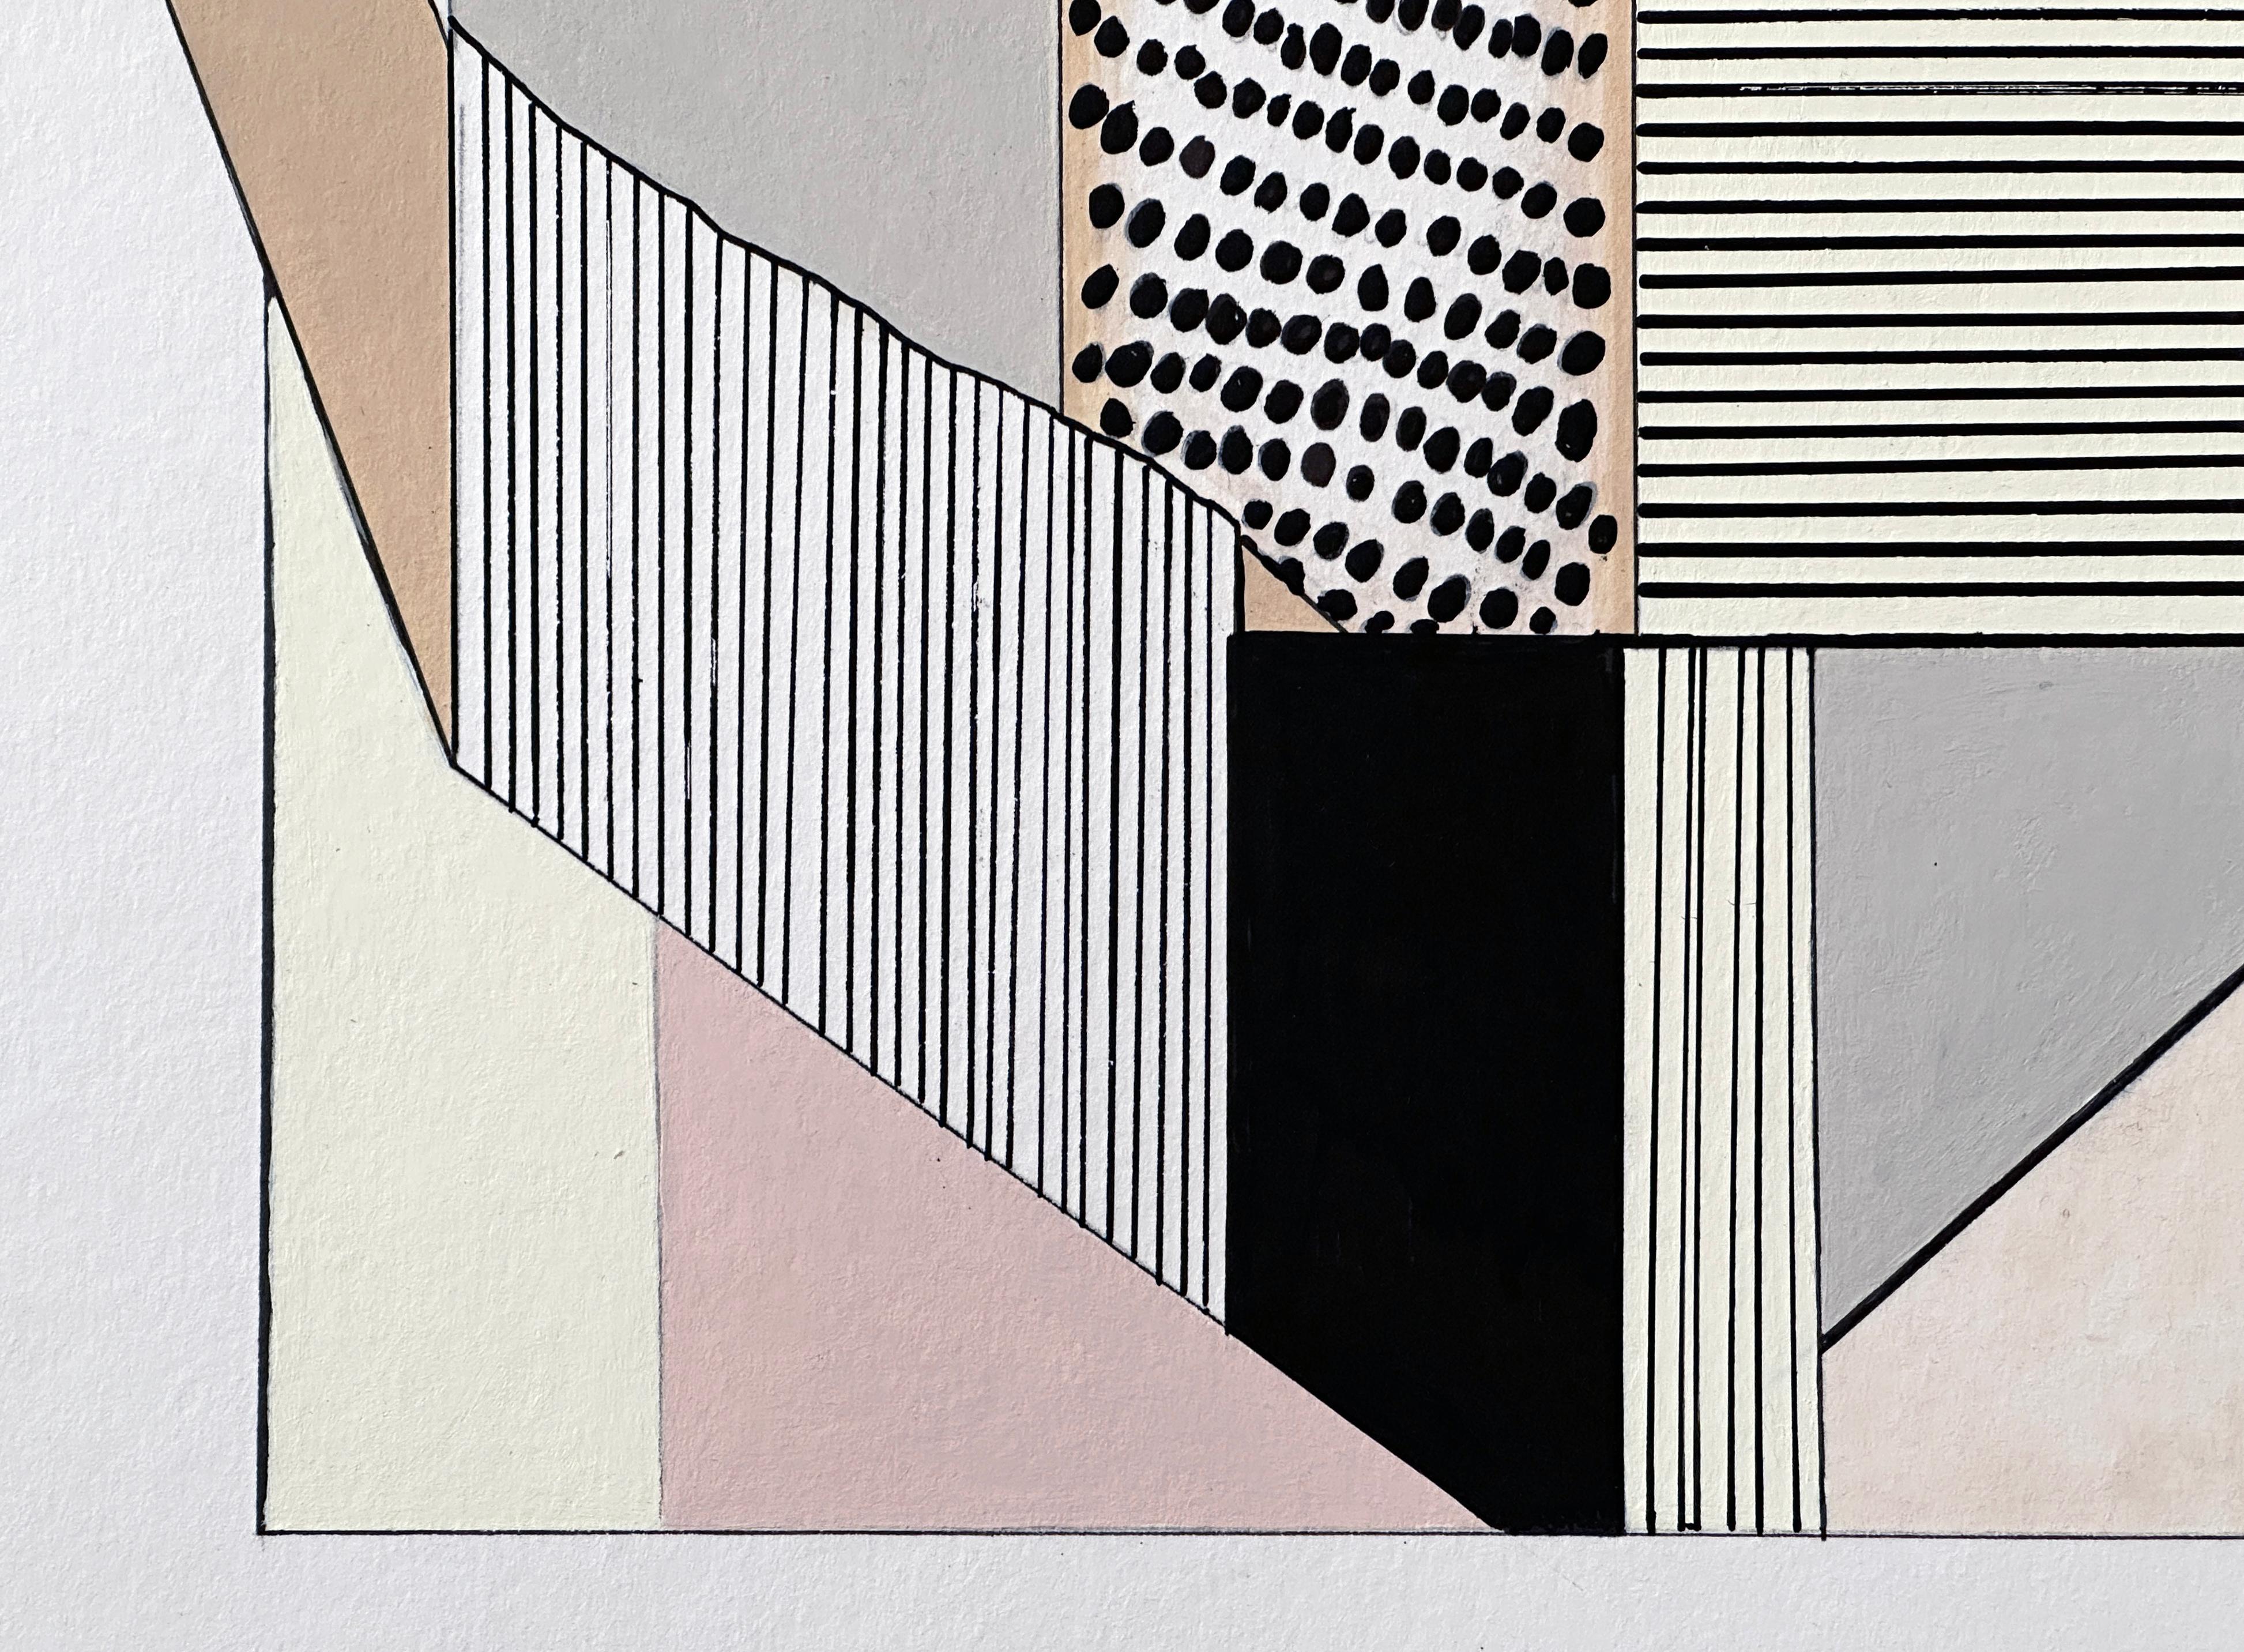 “Edifice” is a group of small works on paper created in 2024 by Amanda Andersen. 
This series of contemporary drawings explores architectural forms with elements of abstraction, sketching out structures that defy the bounds of possibility. 
Each